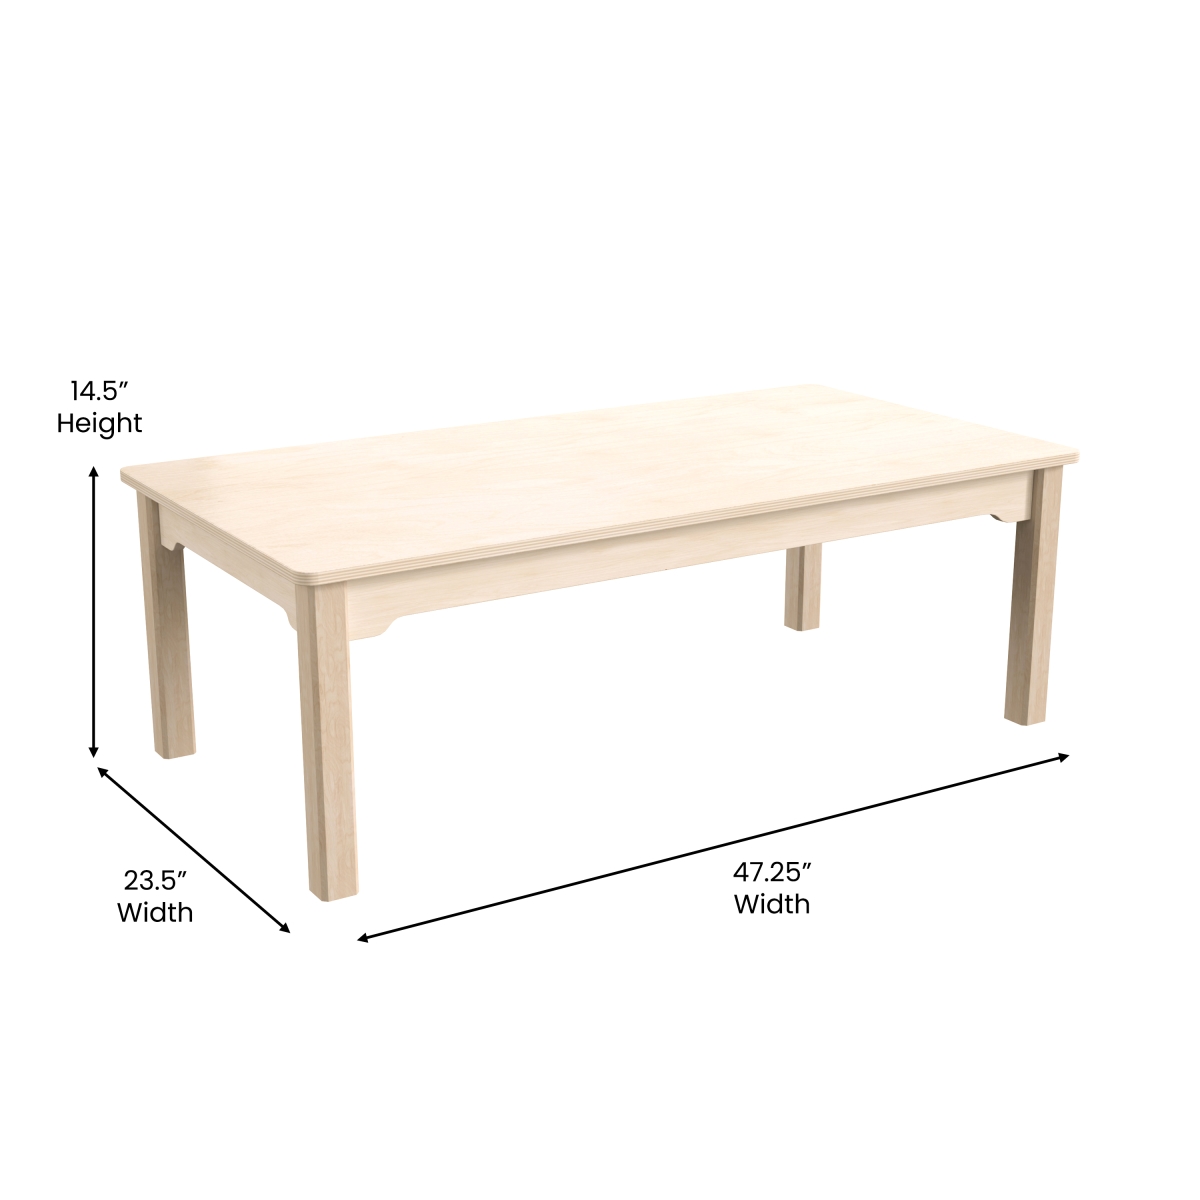 Picture of Flash Furniture MK-ME088010-GG 23.5 x 47.25 x 14.5 in. Bright Beginnings Commercial Grade Wooden Rectangular Preschool Classroom Activity Table, Beech